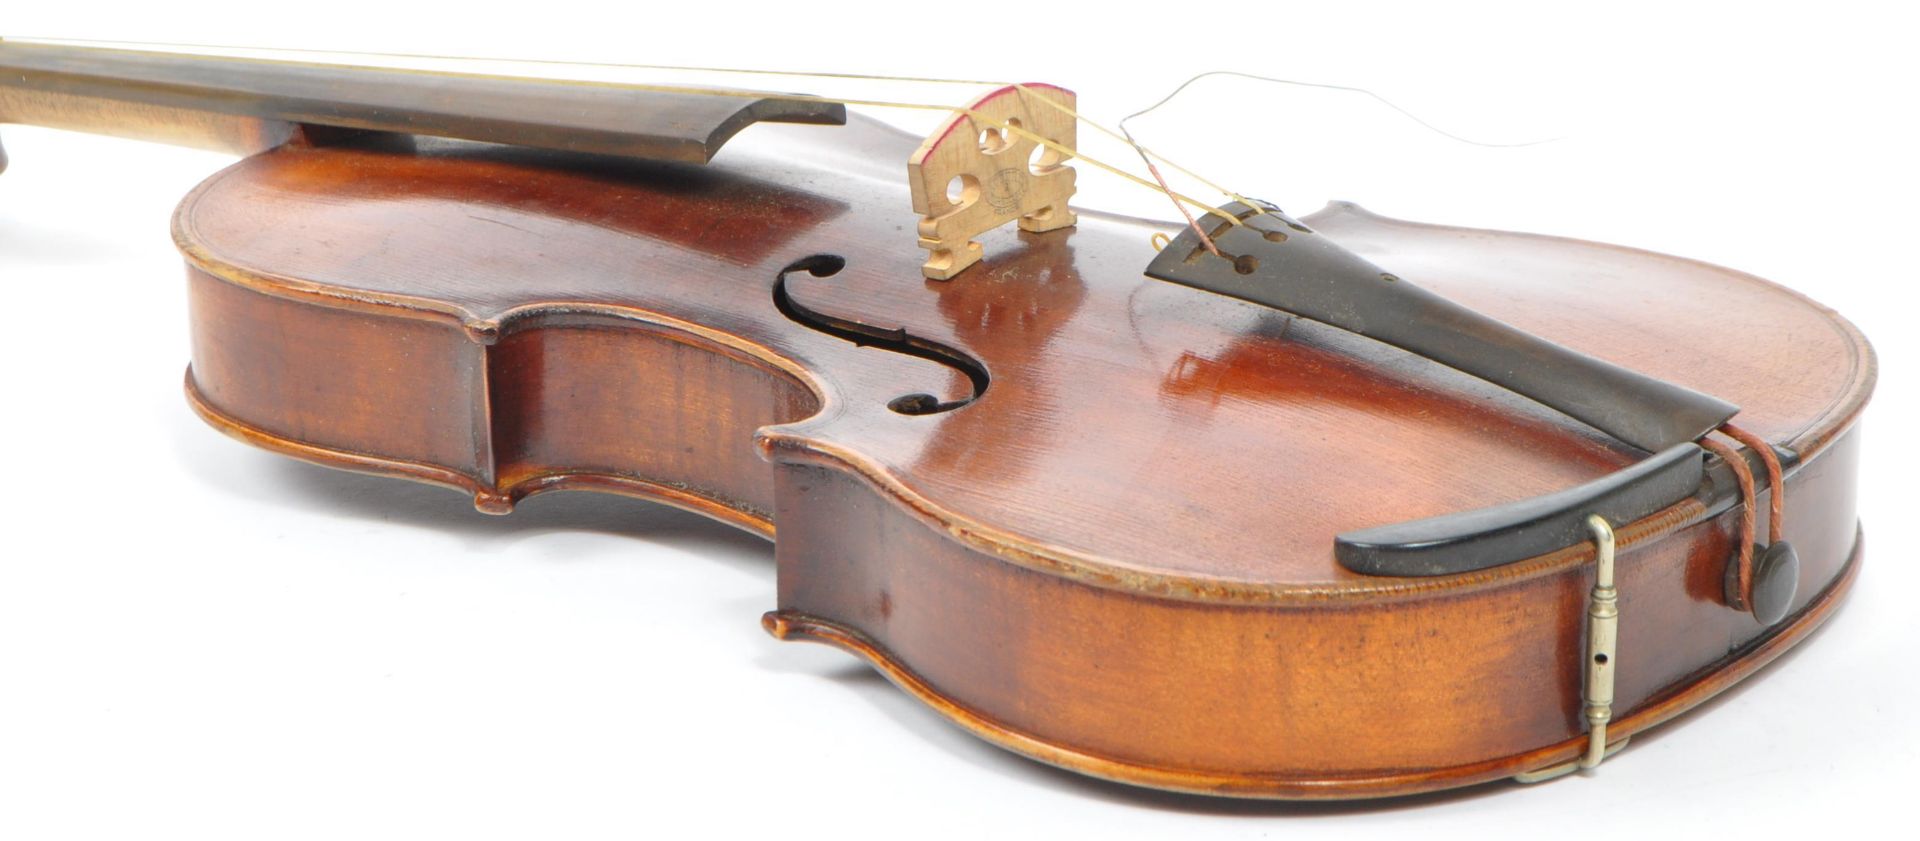 20TH CENTURY FULL SIZE VIOLIN WITH TWO PIECE BACK - Image 6 of 10